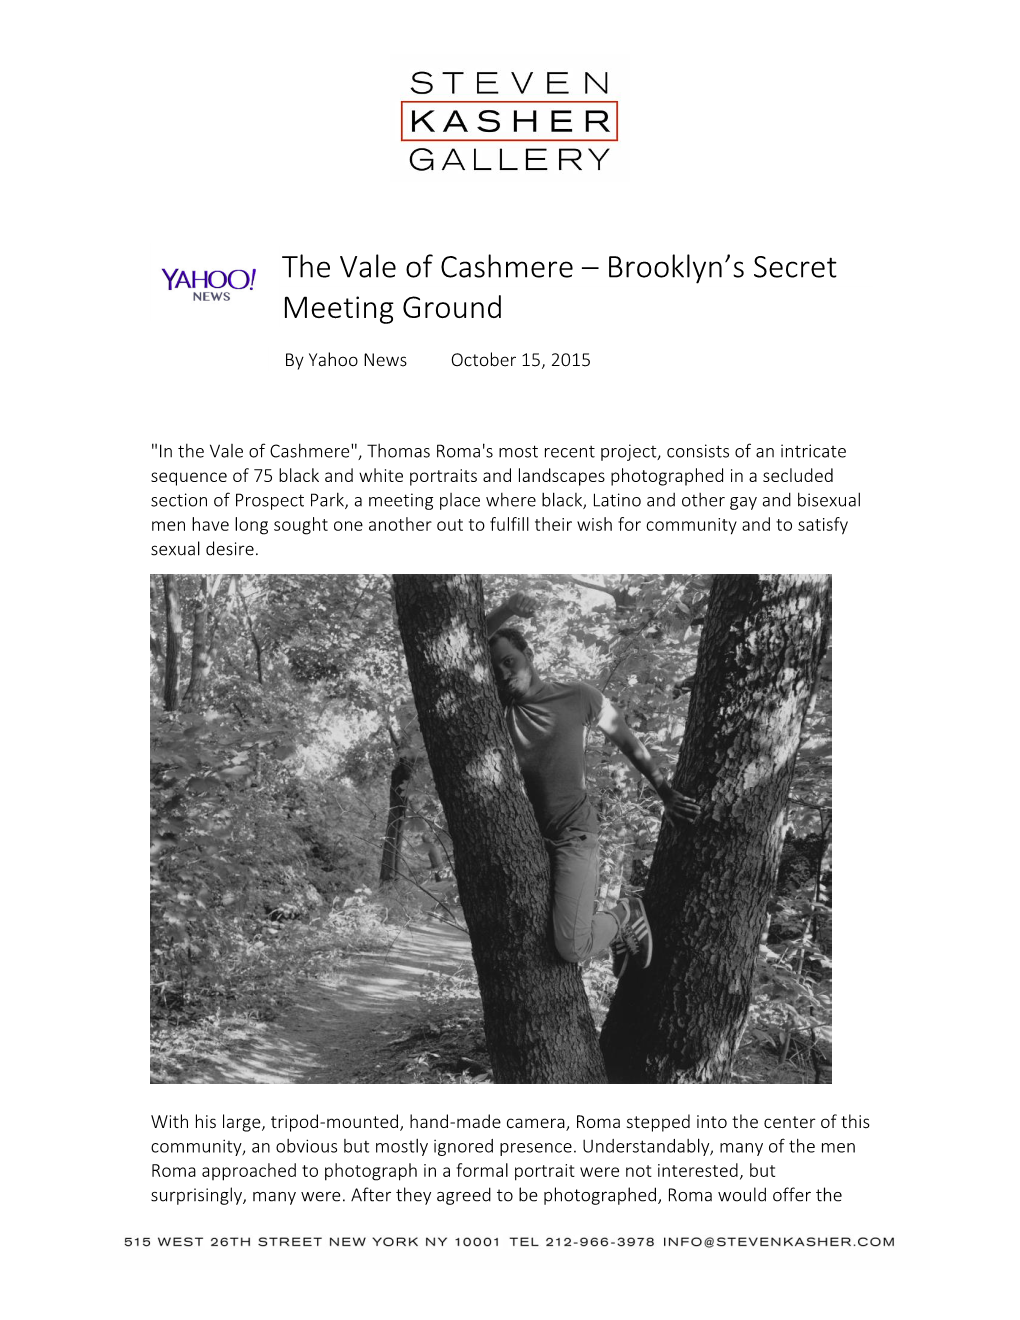 The Vale of Cashmere – Brooklyn's Secret Meeting Ground